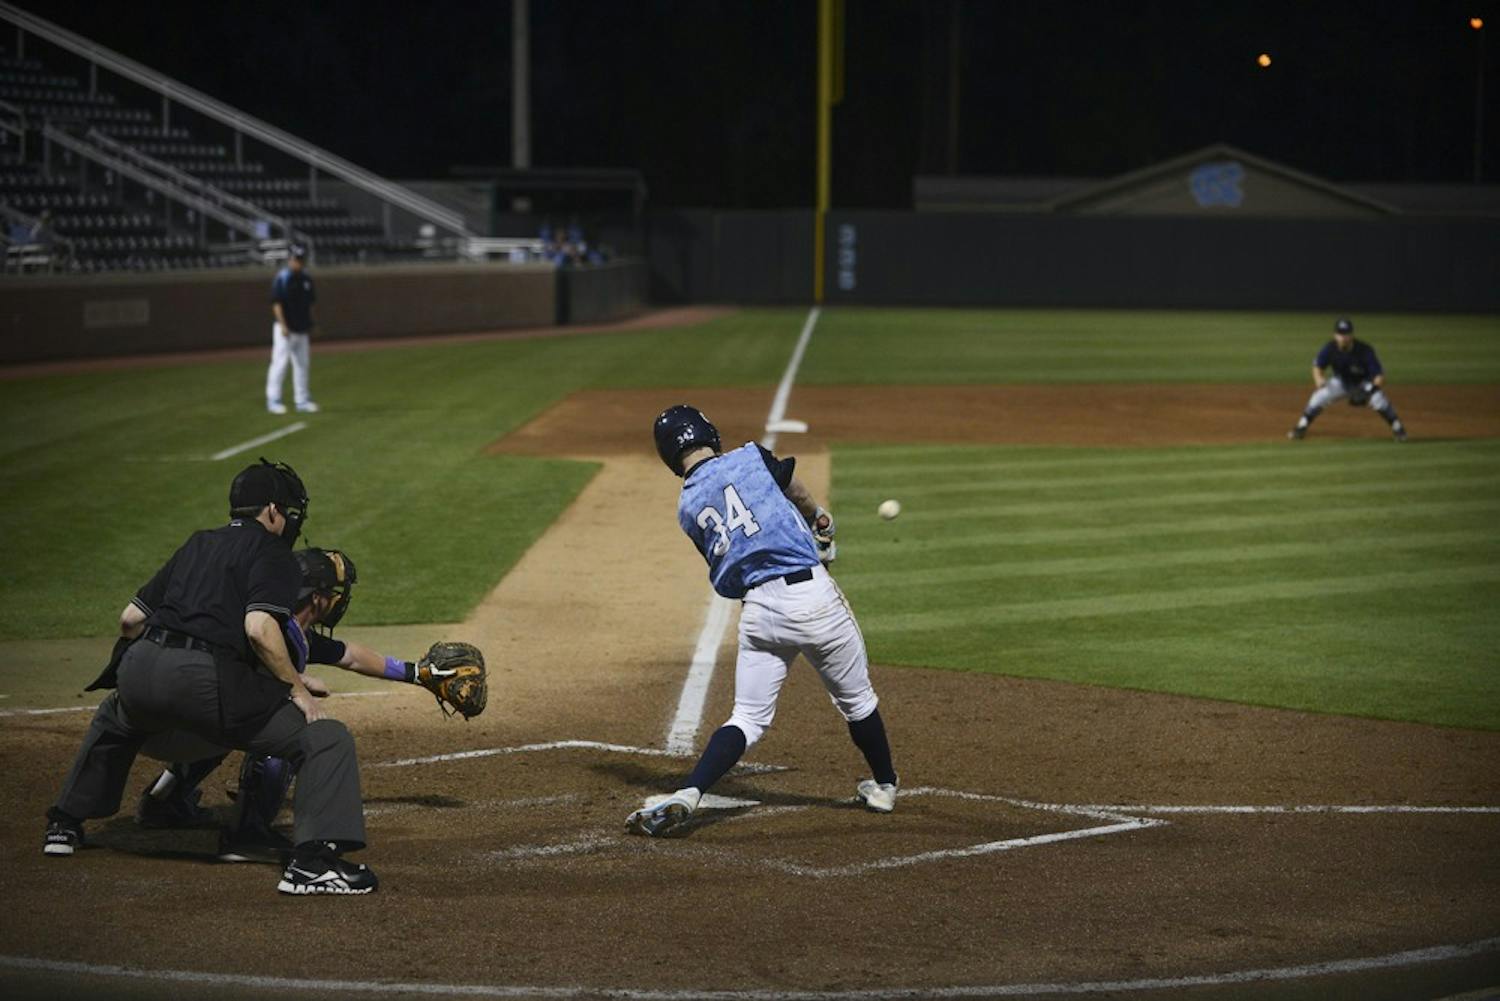 UNC freshman Brian Miller (34) rips a solid line drive to left field in Tuesday's game against High Point.